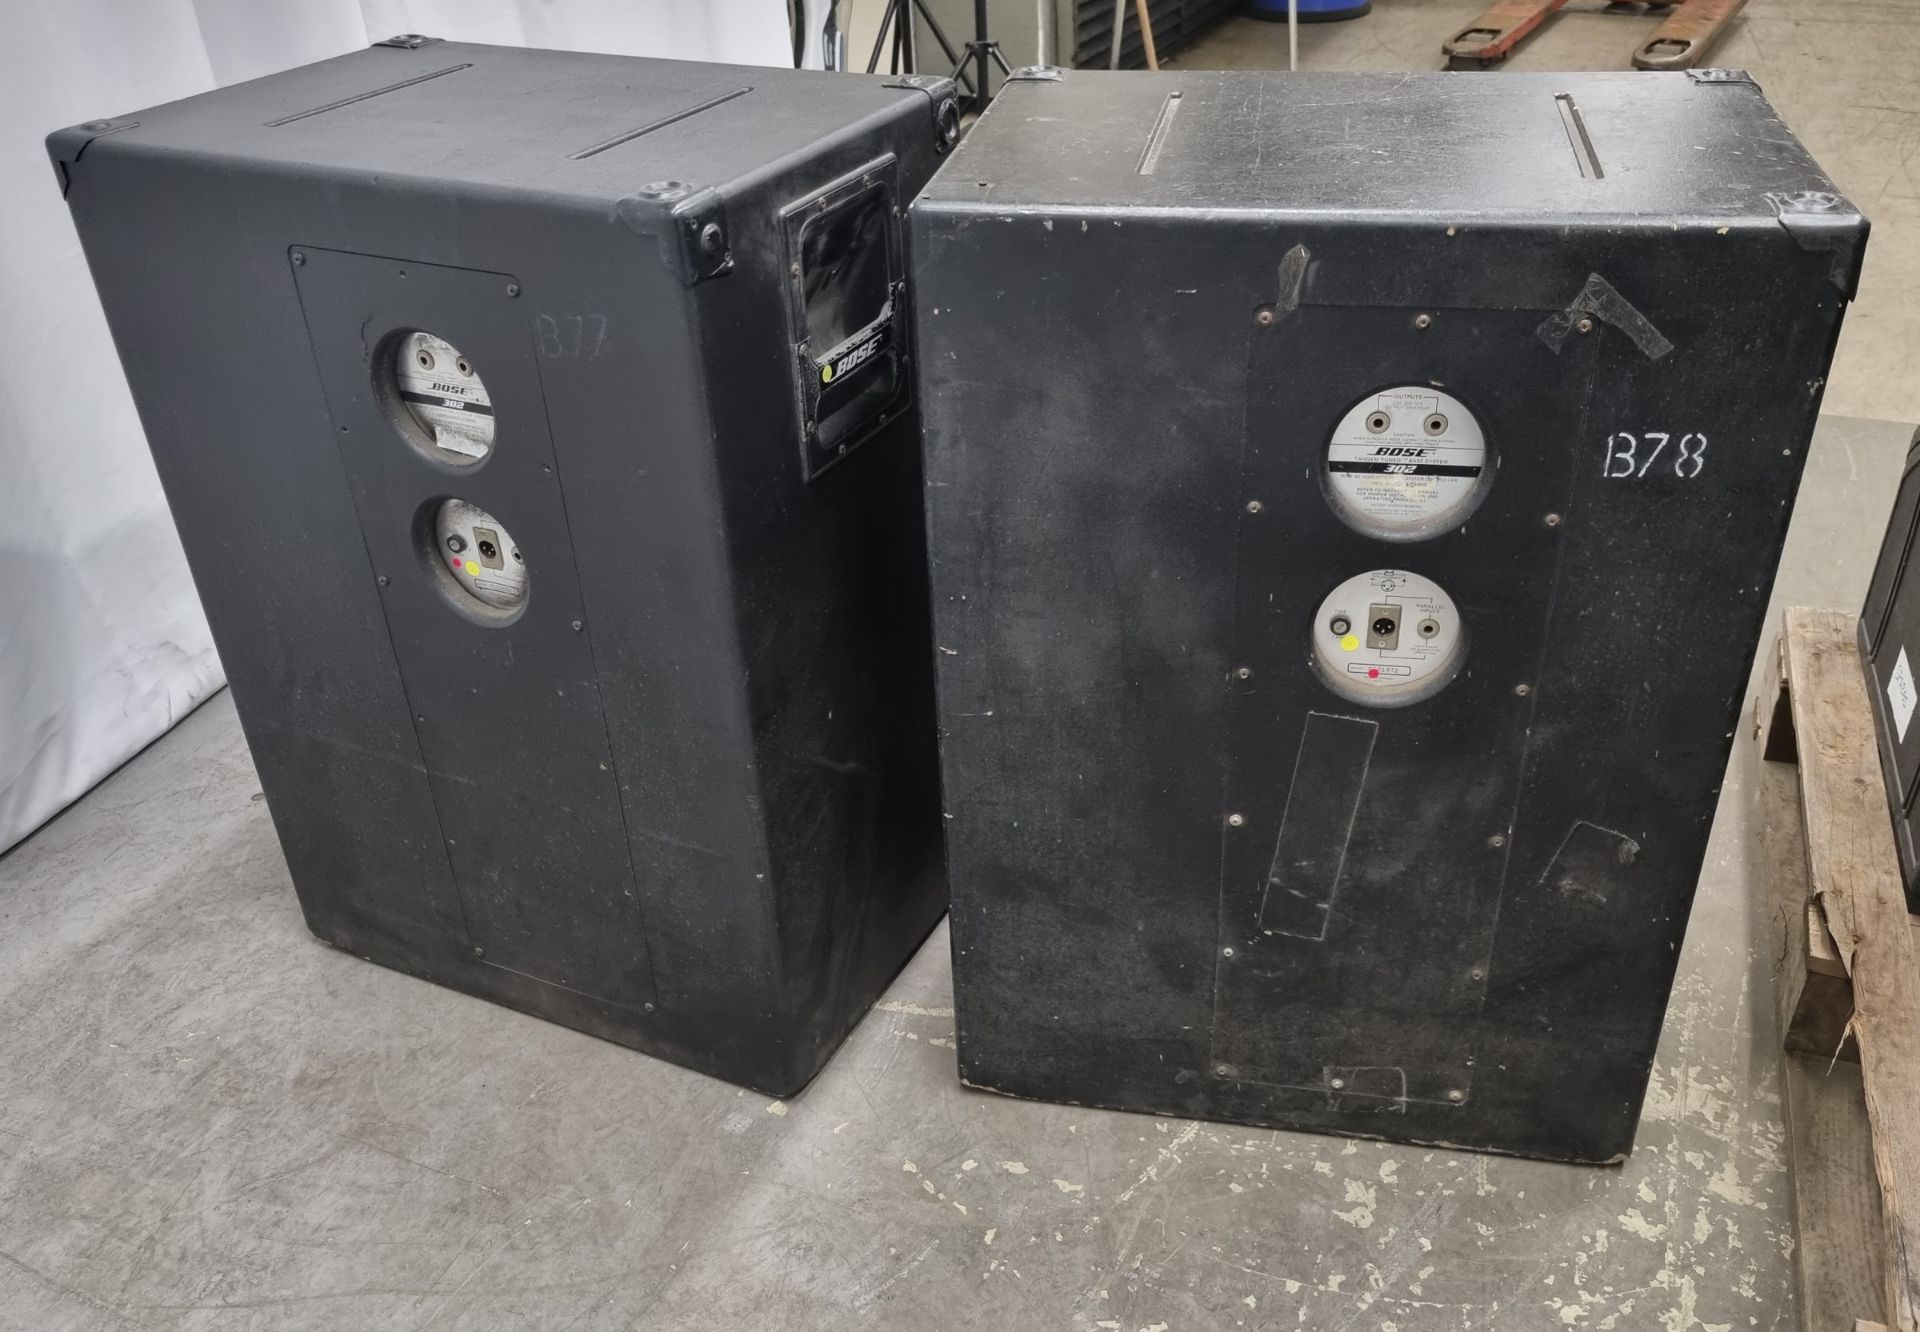 8x BOSE 802 series 2 speakers in cases, 2x BOSE 302 subwoofers with covers - Bild 4 aus 10